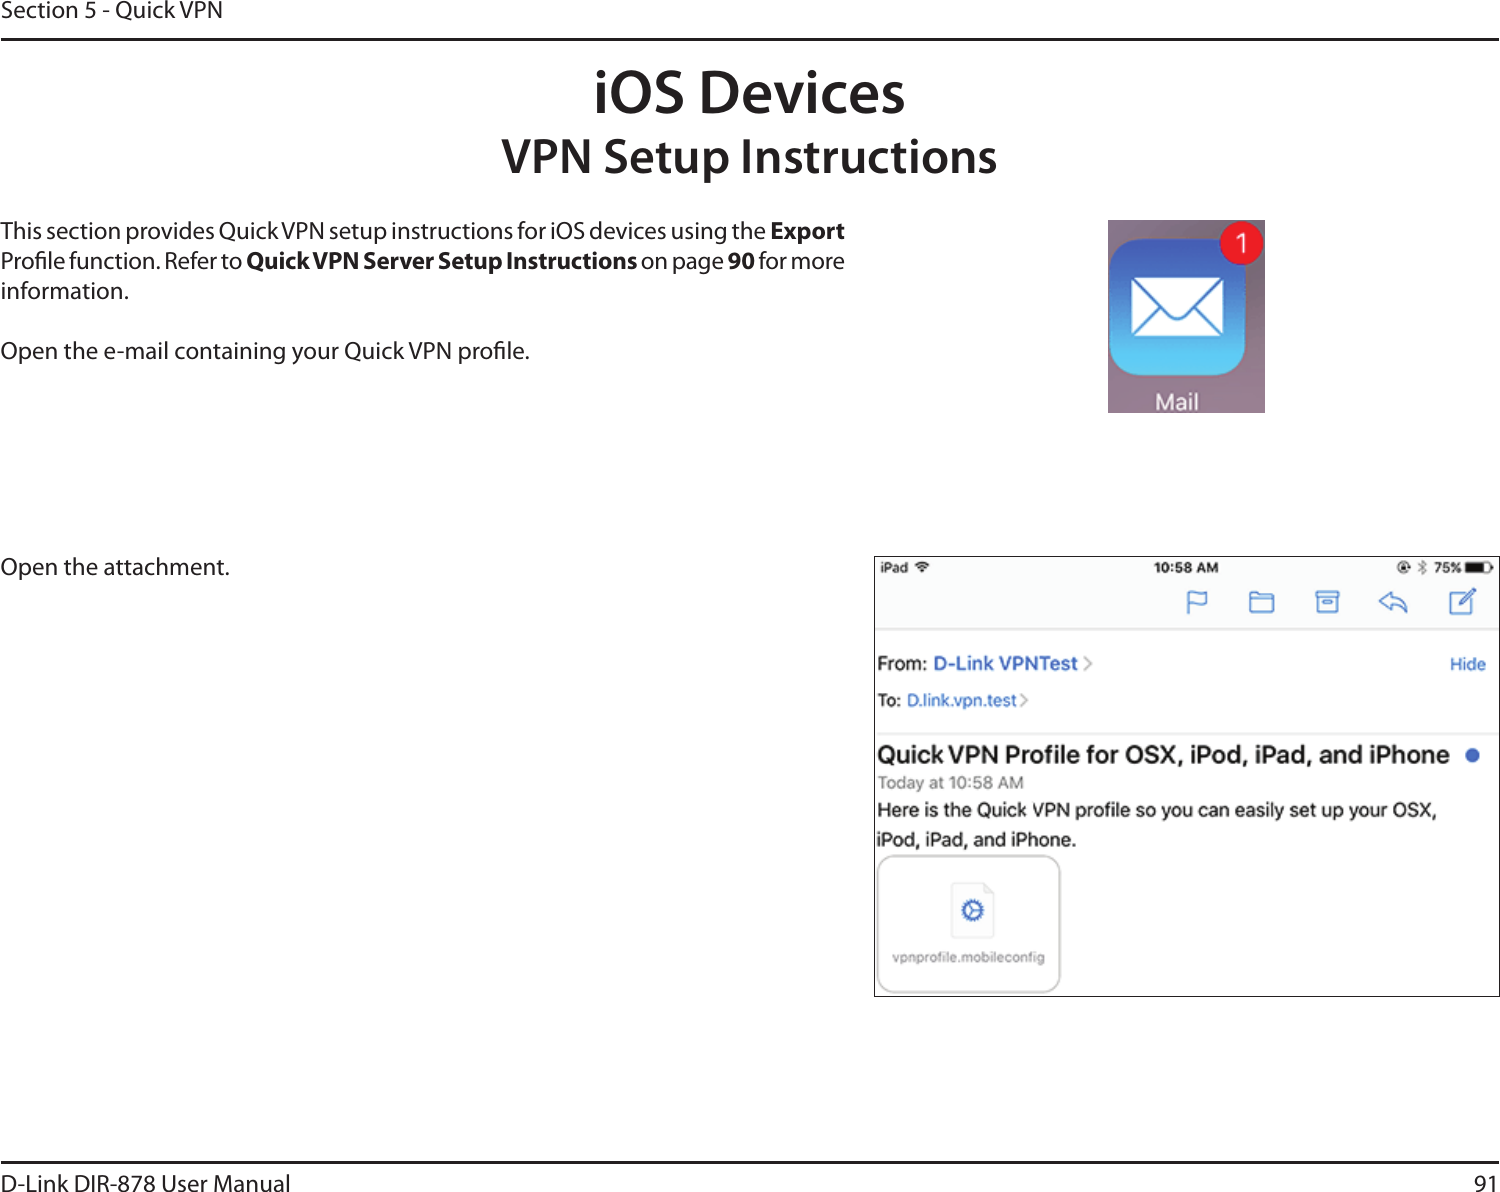 91D-Link DIR-878 User ManualSection 5 - Quick VPNiOS DevicesVPN Setup InstructionsThis section provides Quick VPN setup instructions for iOS devices using the &amp;YQPSUProle function. Refer to Quick VPN Server Setup Instructions on page 90 for more information.Open the e-mail containing your Quick VPN prole.Open the attachment. 